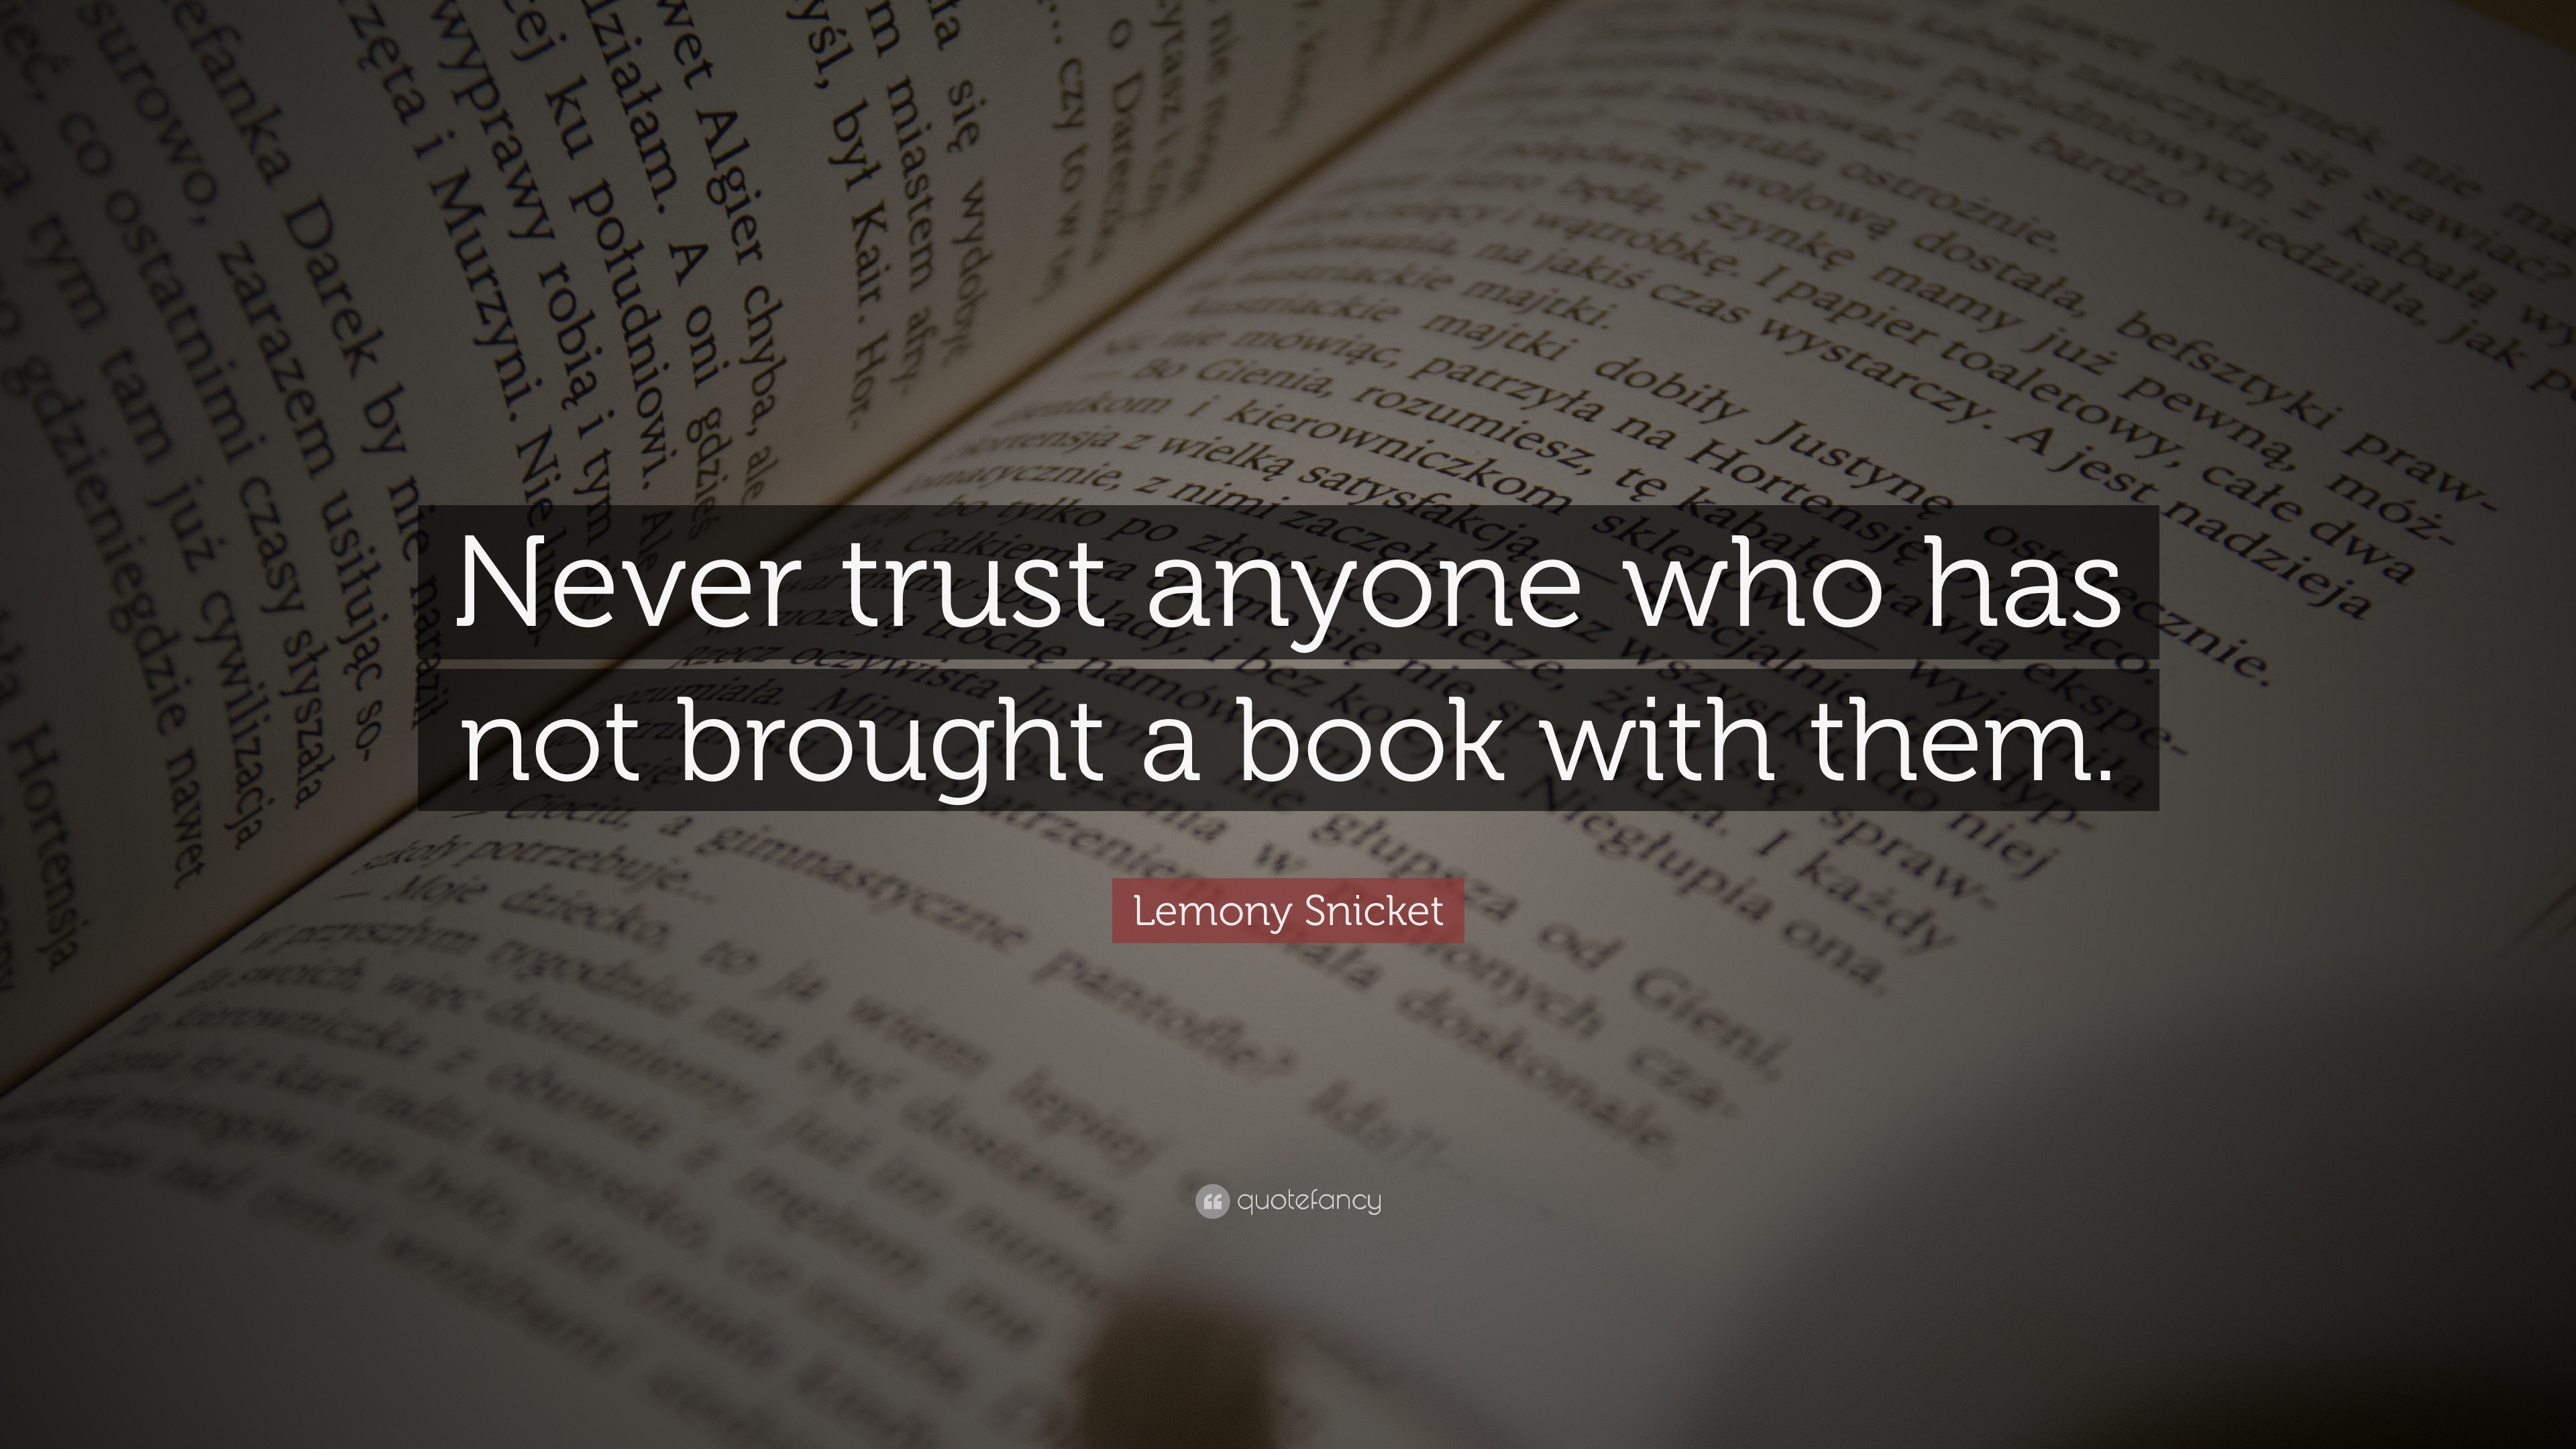 3840x2160 Lemony Snicket Quote: “Never trust anyone who has not brought a book with  them